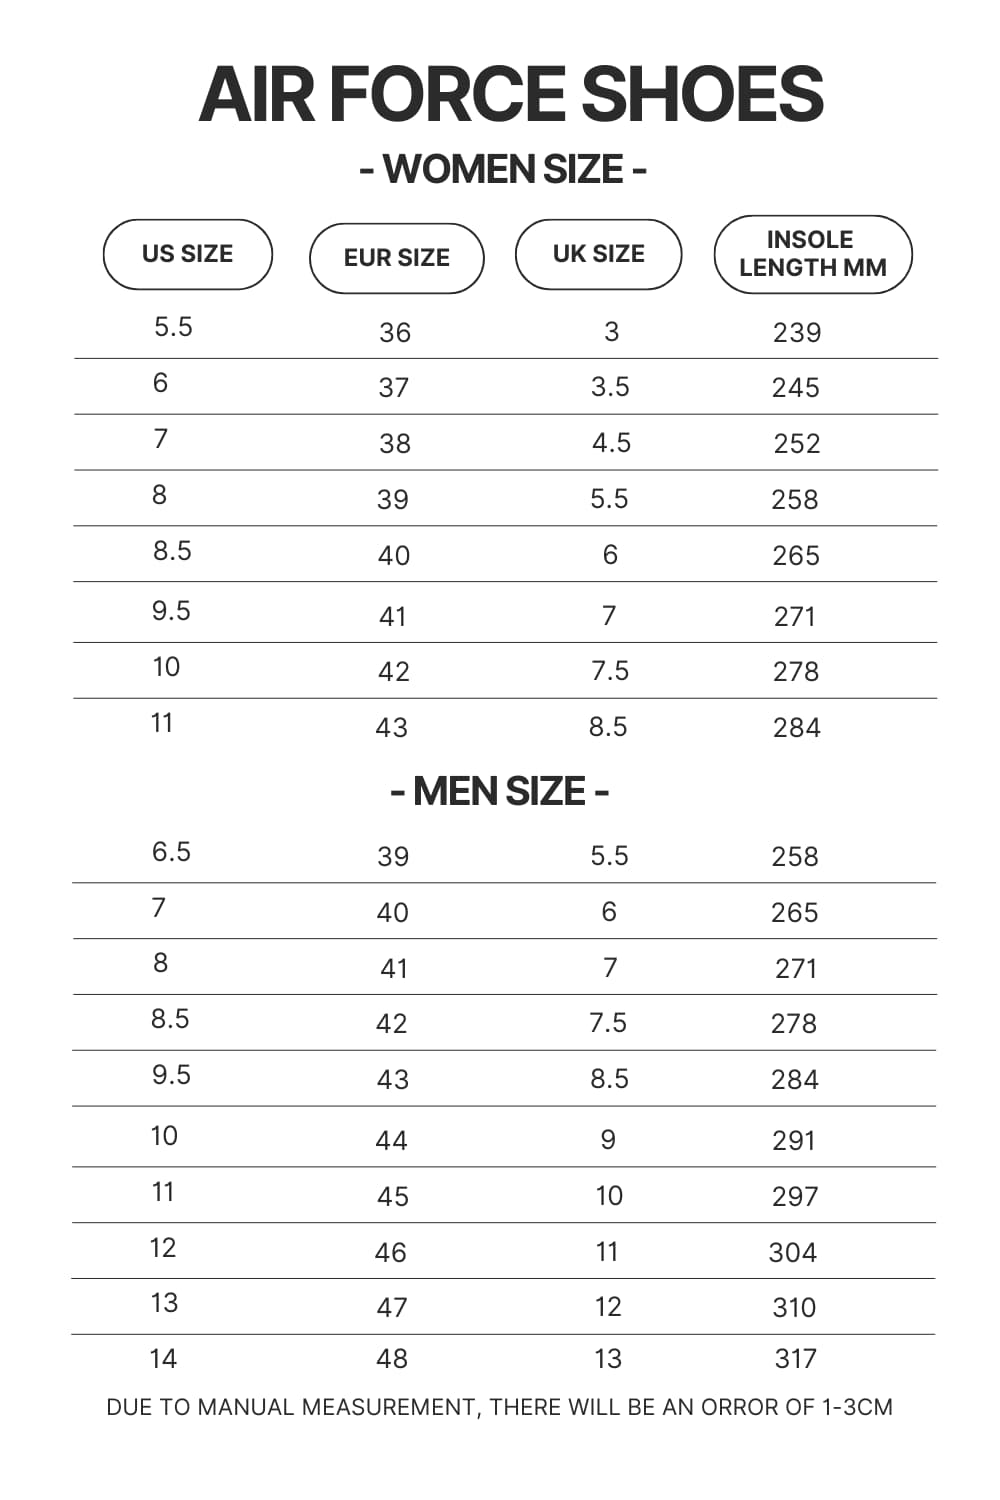 Air Force Shoes Size Chart - One Piece Shoes